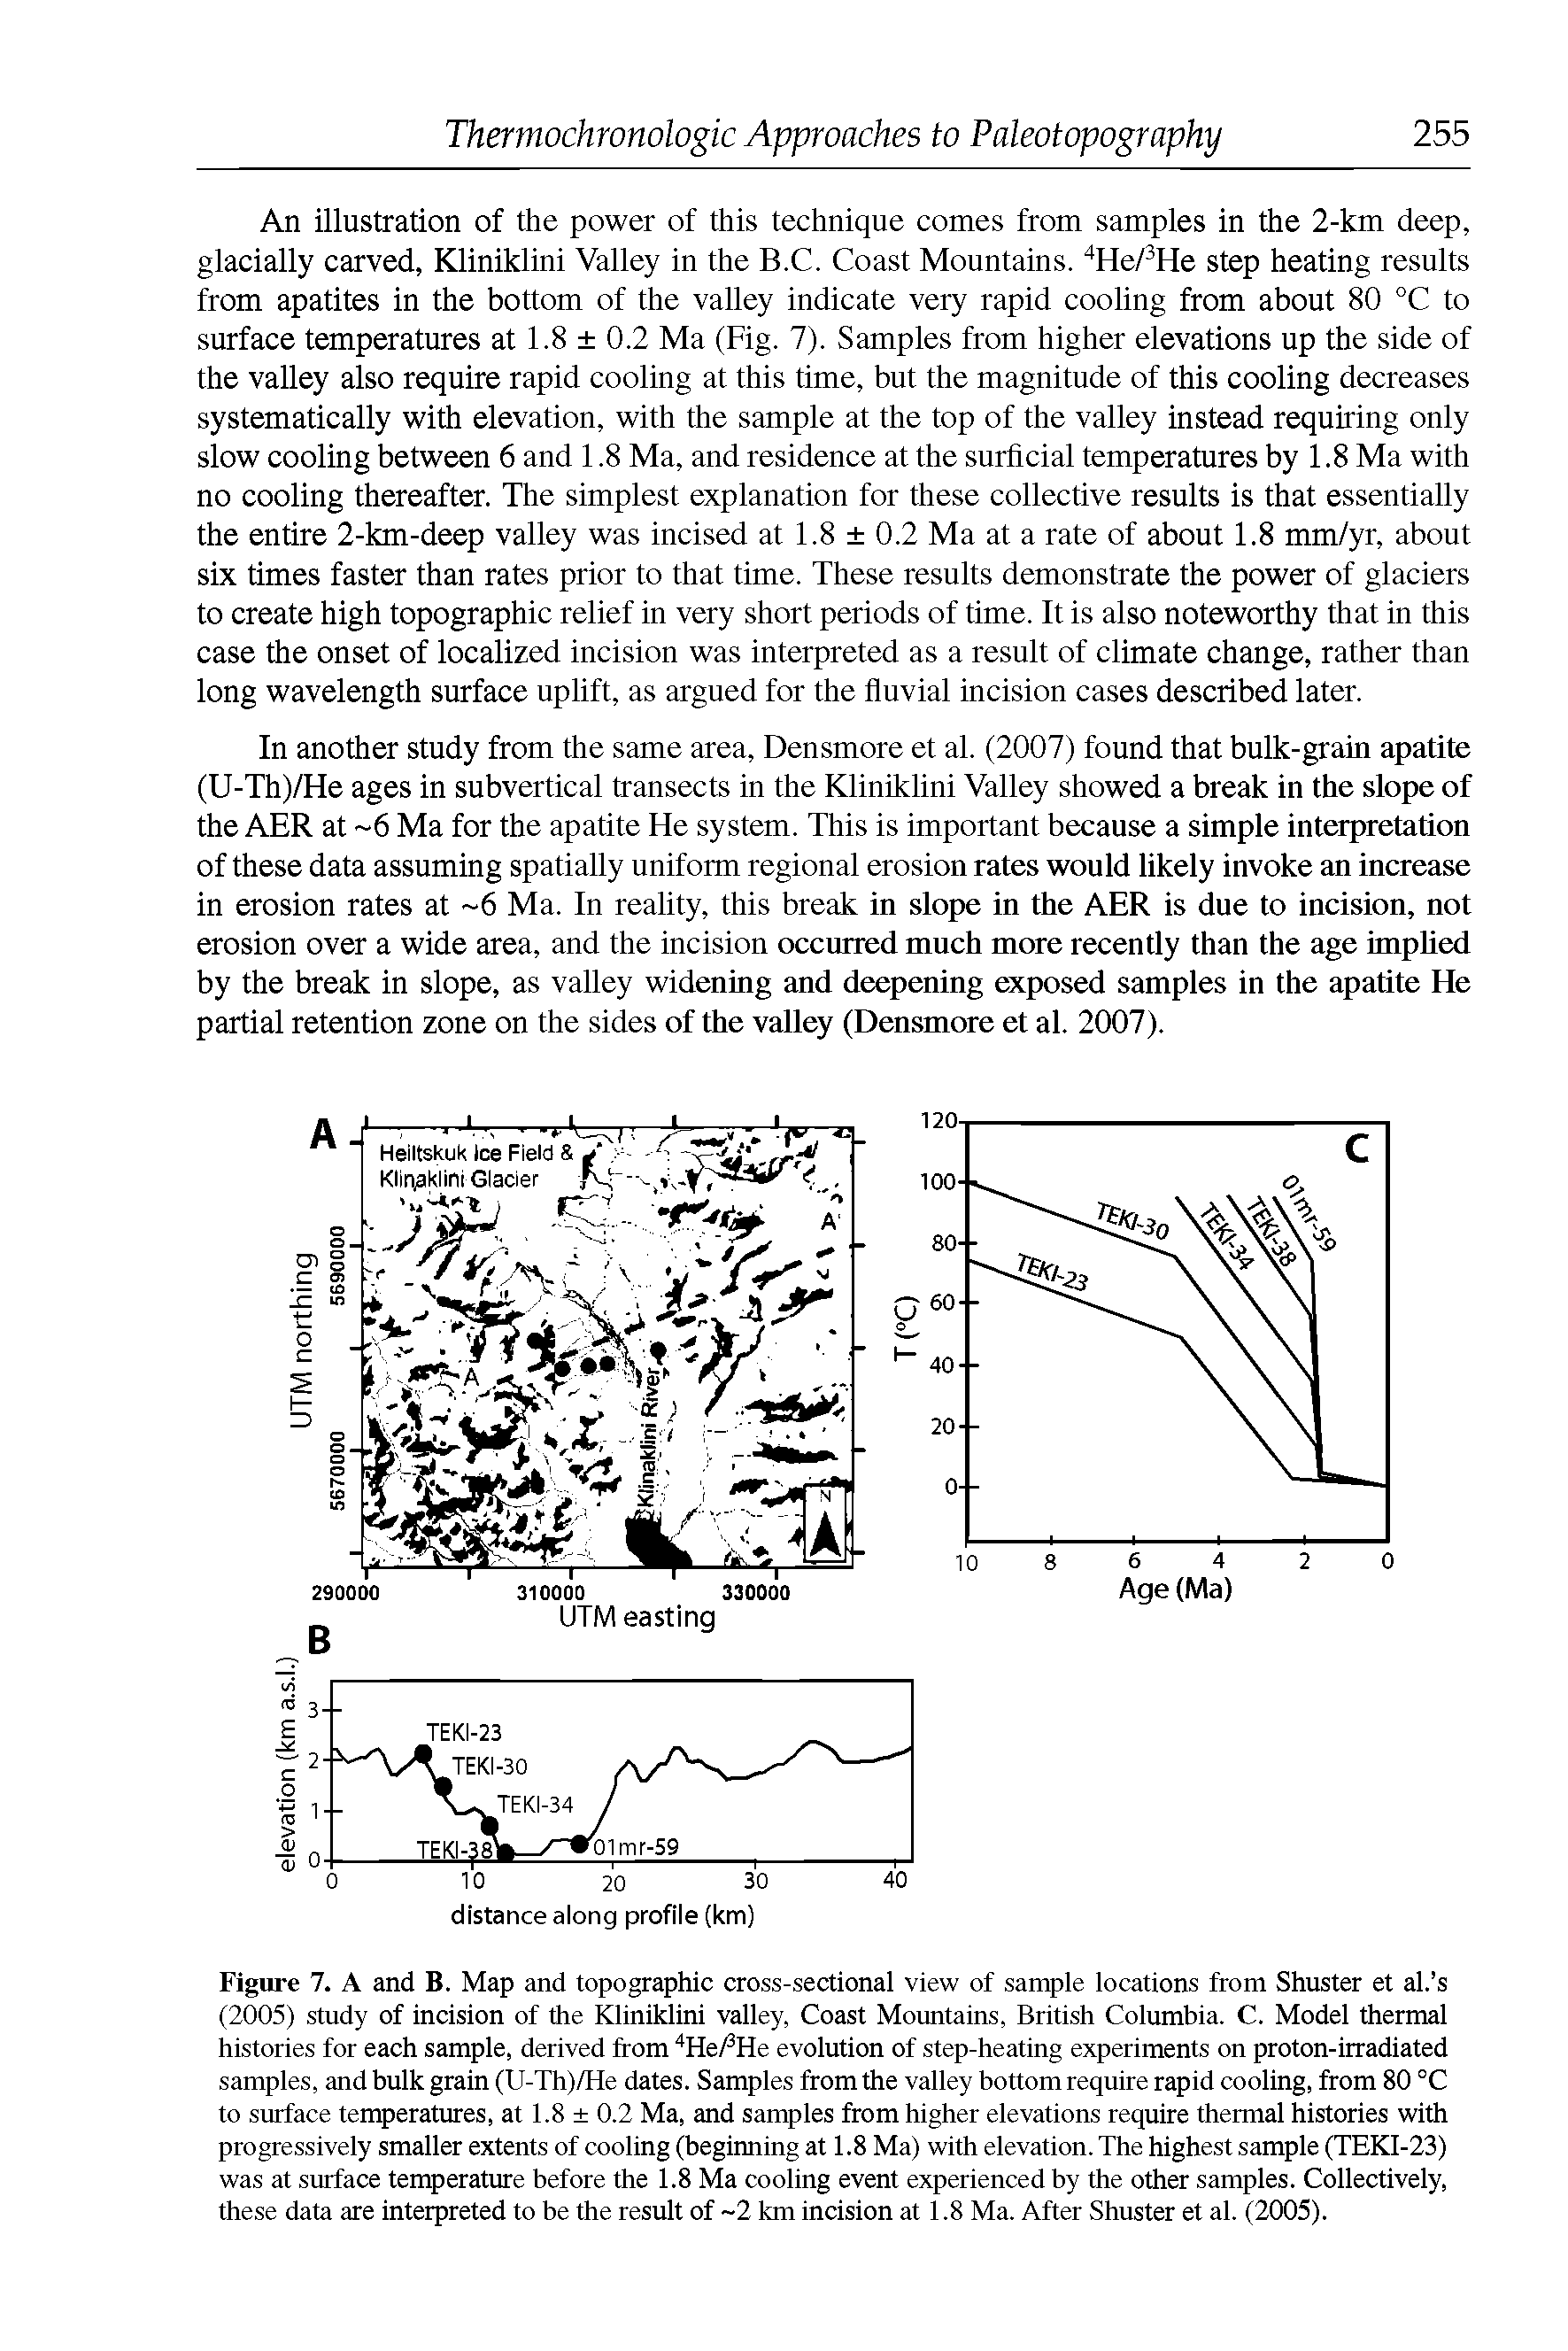 Figure 7. A and B. Map and topographic cross-sectional view of sample locations from Shuster et al. s (2005) study of incision of the Kliniklini valley, Coast Mountains, British Columbia. C. Model thermal histories for each sample, derived from 4He/3He evolution of step-heating experiments on proton-irradiated samples, and bulk grain (U-Th)/He dates. Samples from the valley bottom require rapid cooling, from 80 °C to surface temperatures, at 1.8 0.2 Ma, and samples from higher elevations require thermal histories with progressively smaller extents of cooling (beginning at 1.8 Ma) with elevation. The highest sample (TEKI-23) was at surface temperature before the 1.8 Ma cooling event experienced by the other samples. Collectively, these data are interpreted to be the result of -2 km incision at 1.8 Ma. After Shuster et al. (2005).